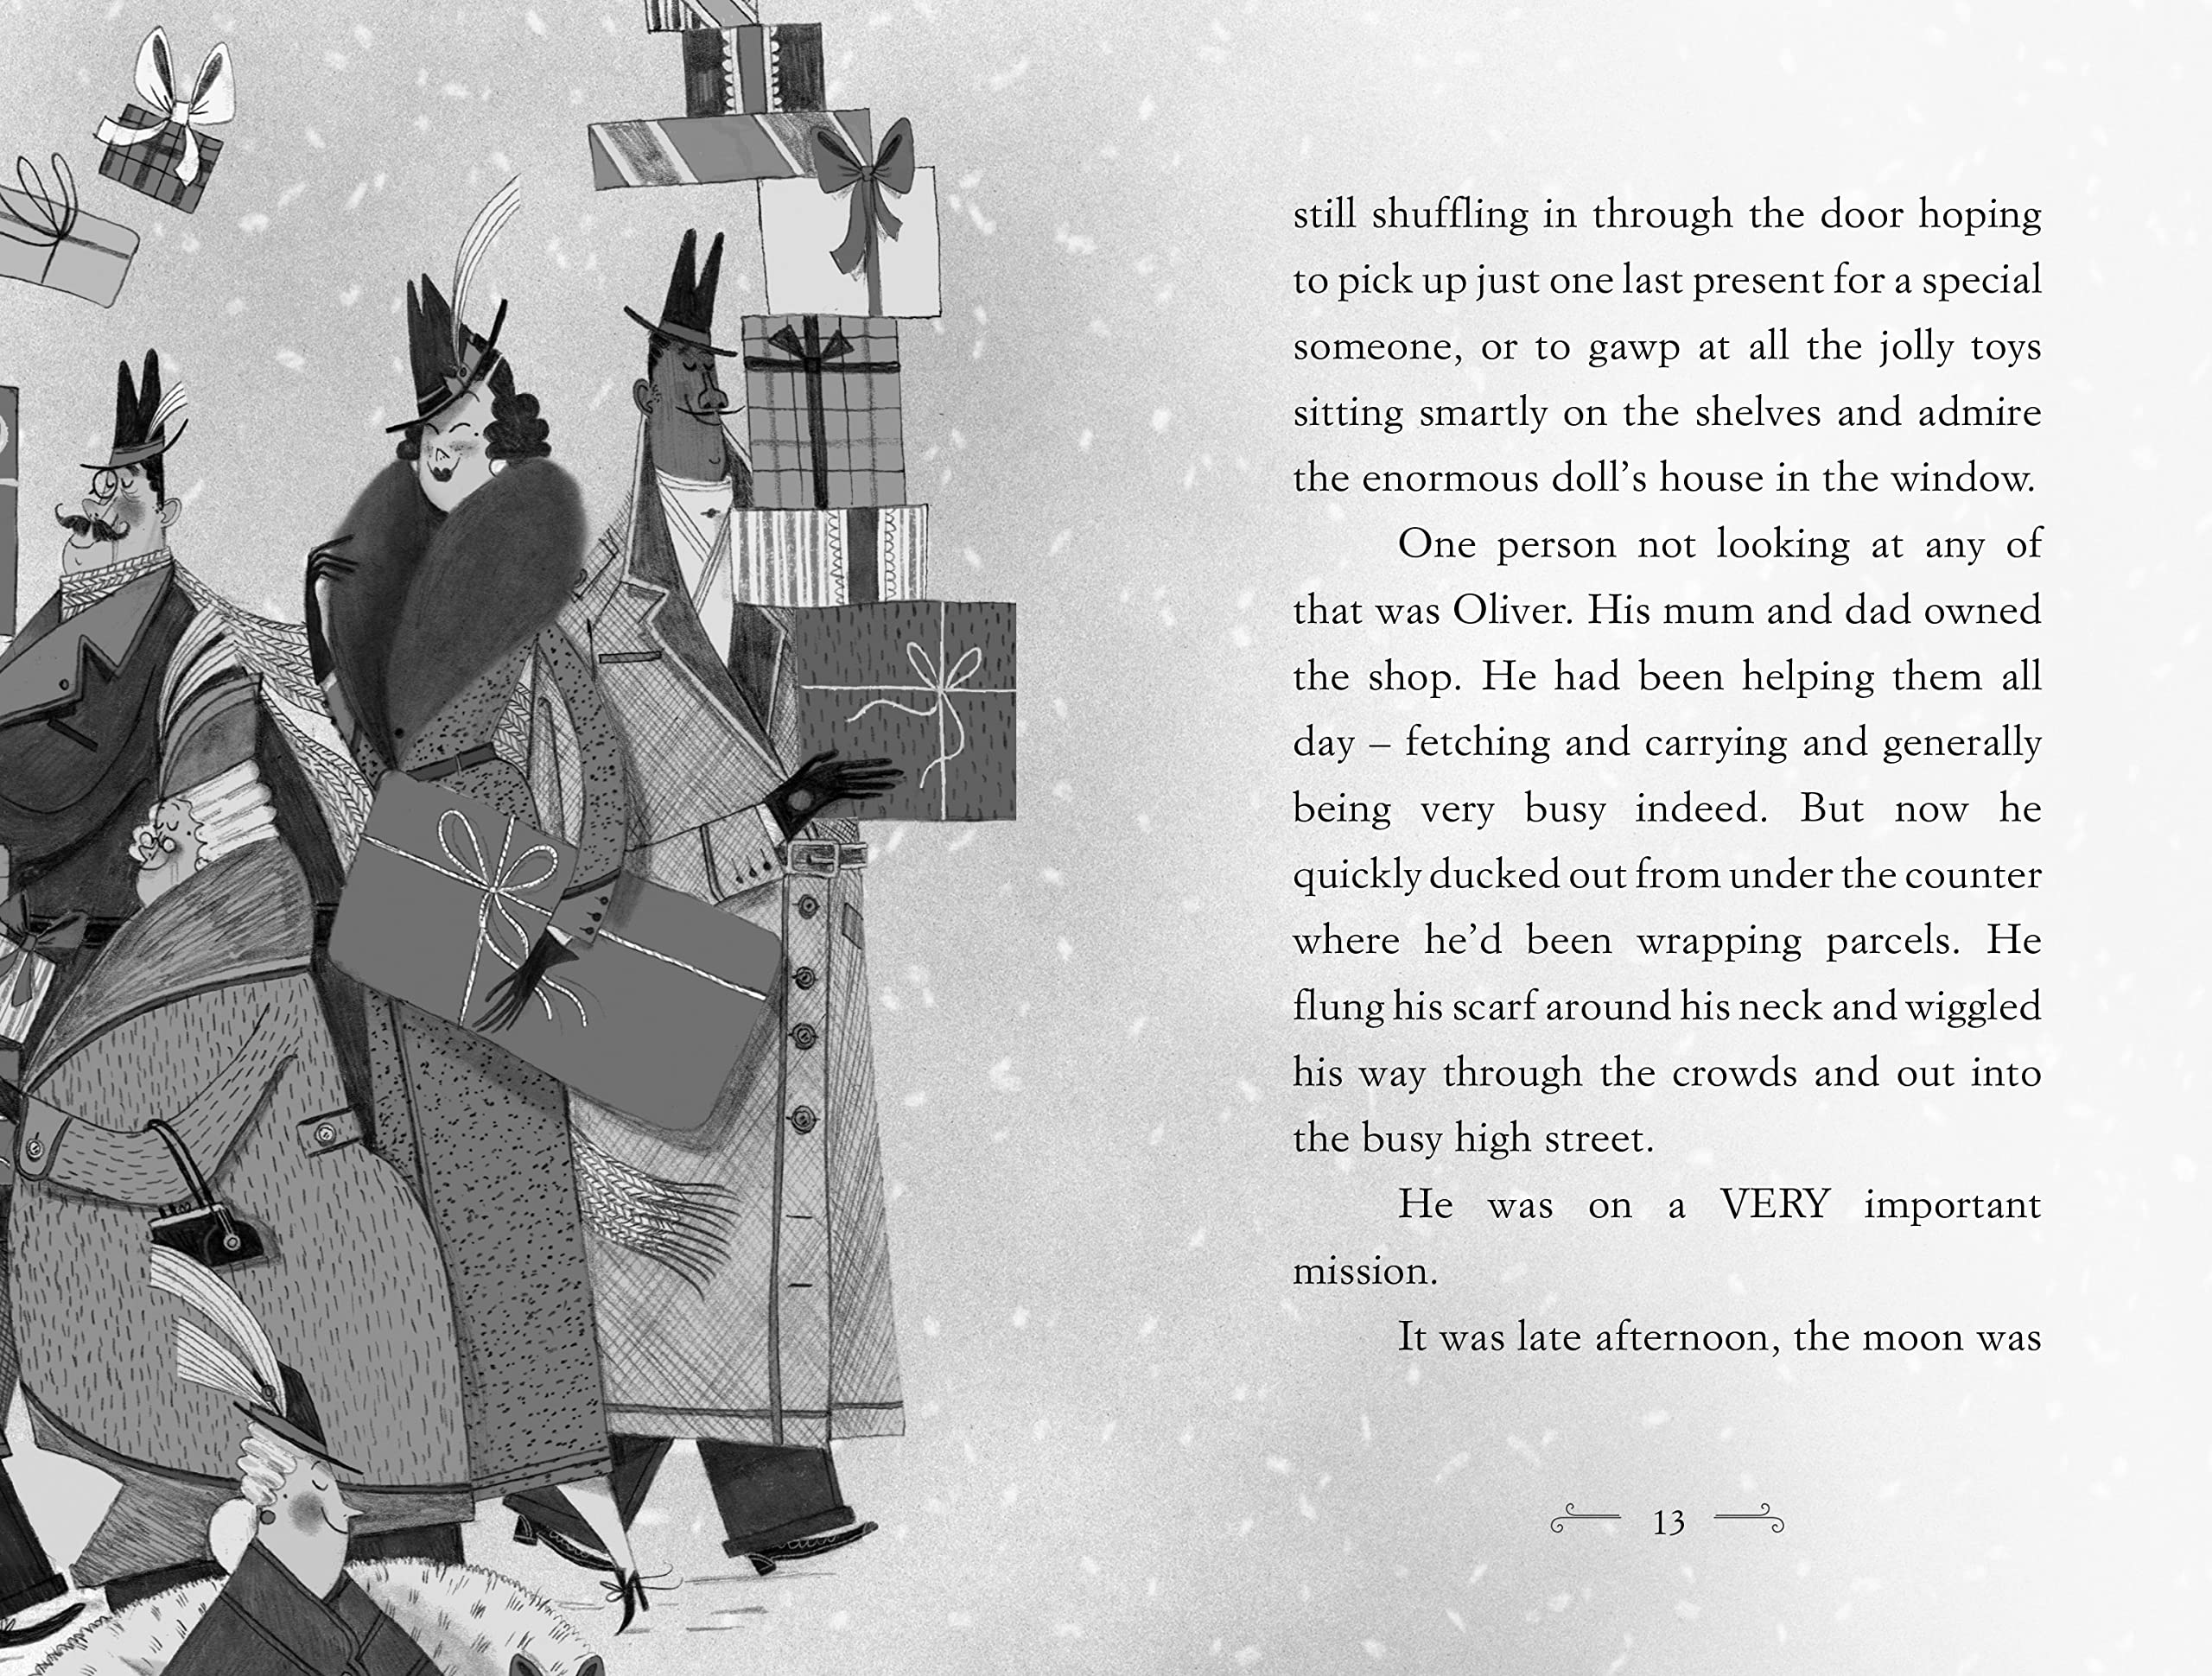 How Winston Delivered Christmas : A Festive Chapter Book with Black and White Illustrations